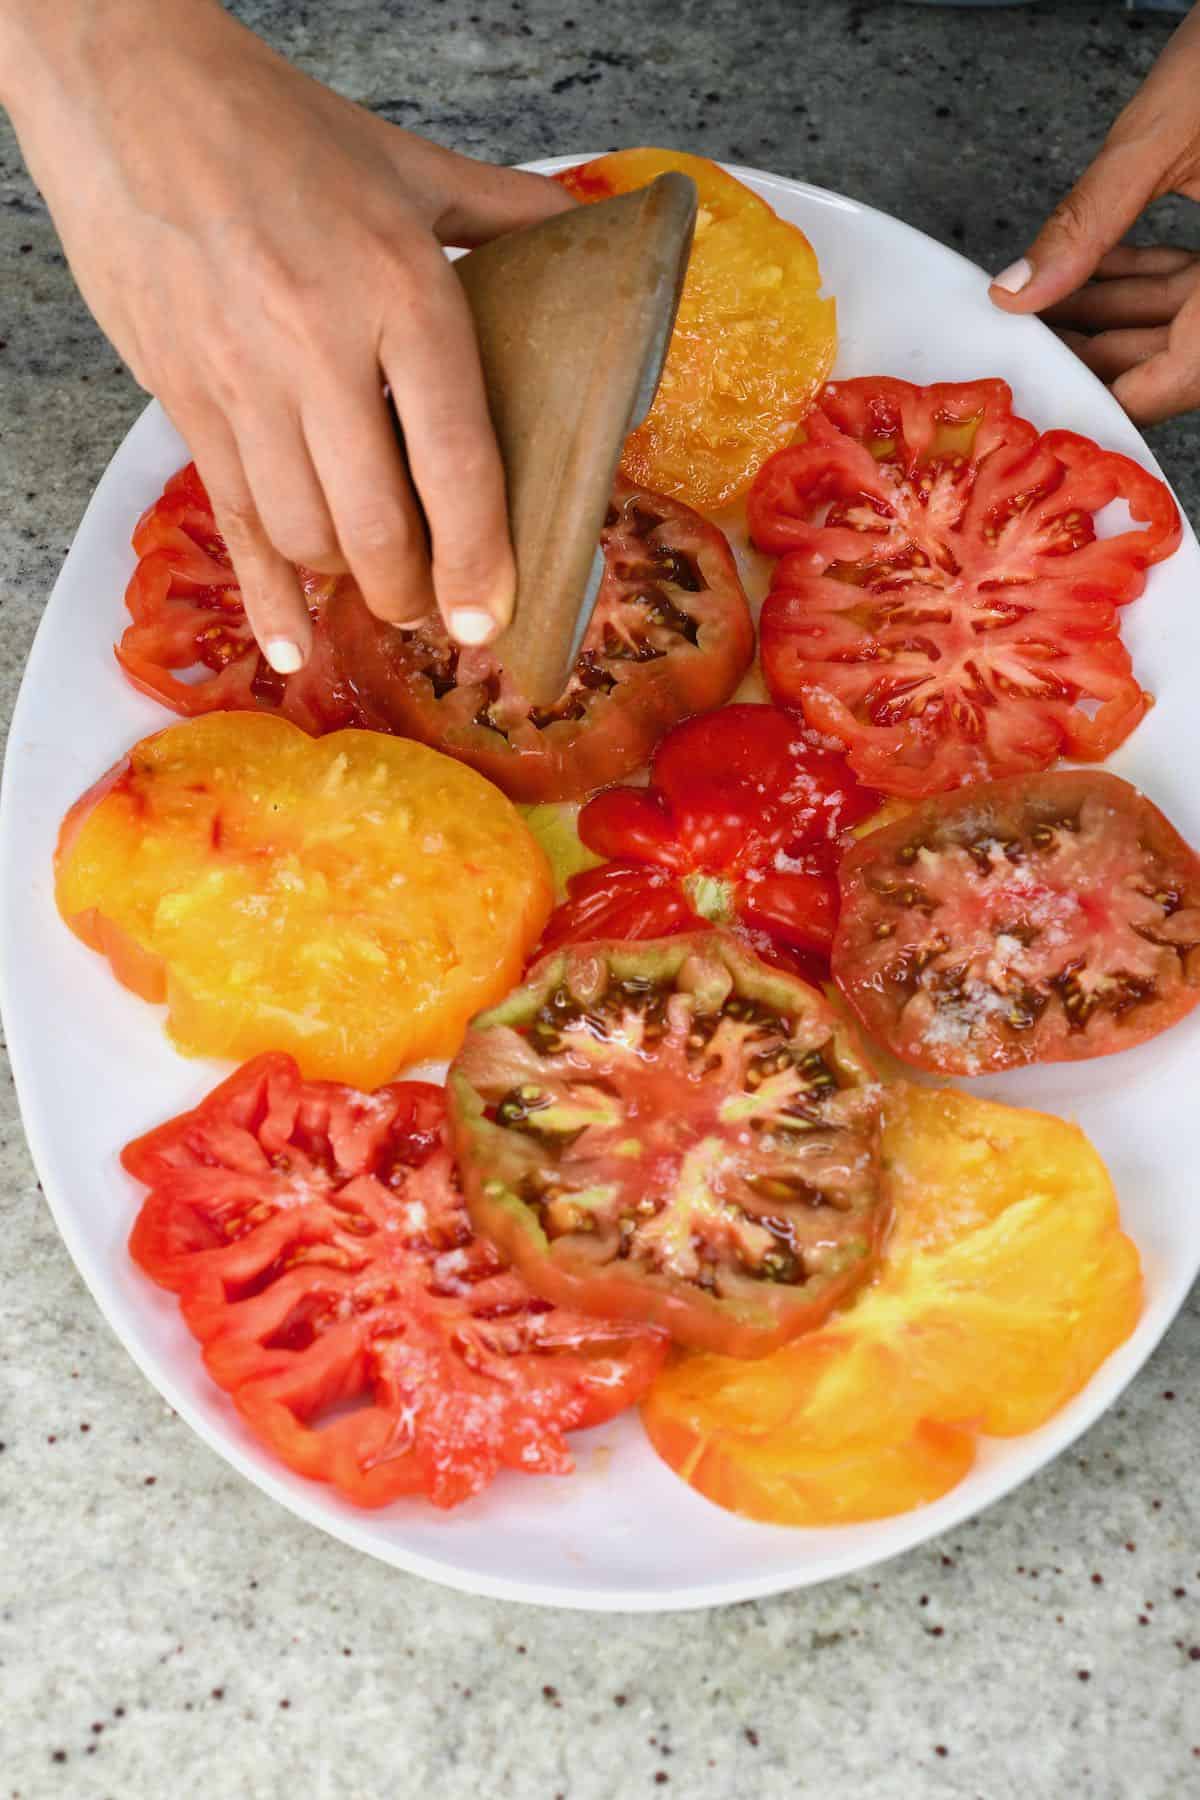 Pouring salad dressing over tomato slices